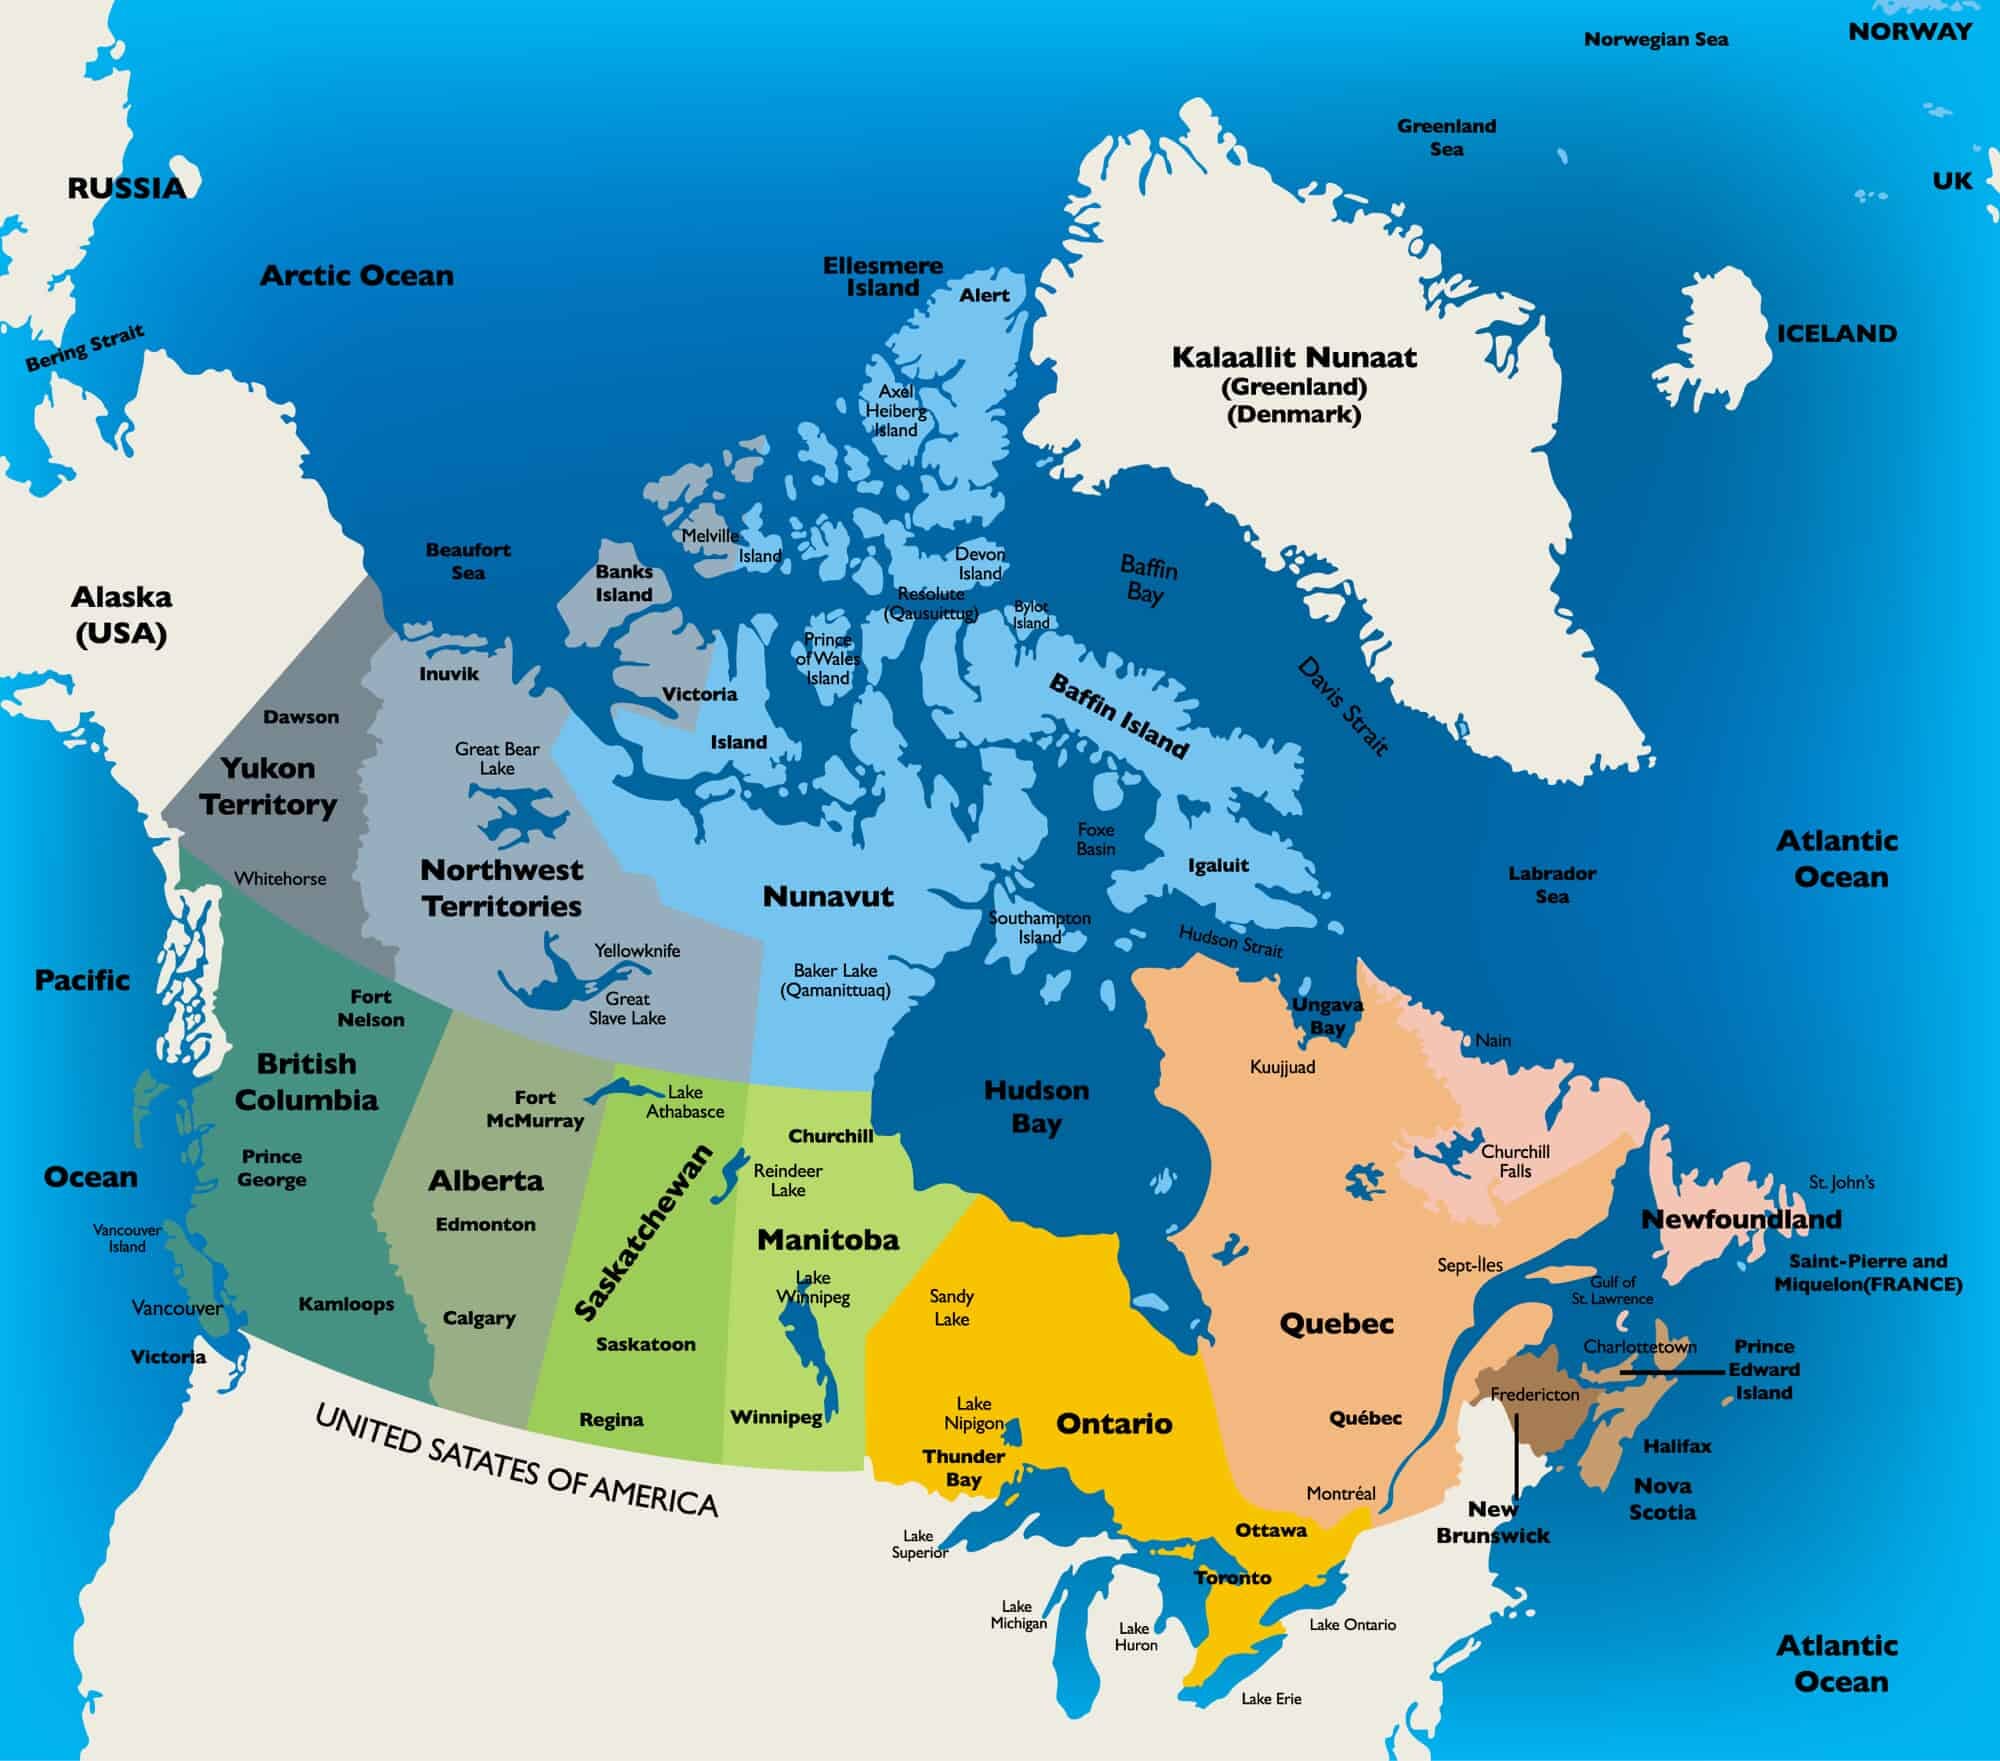 map of canada with lakes